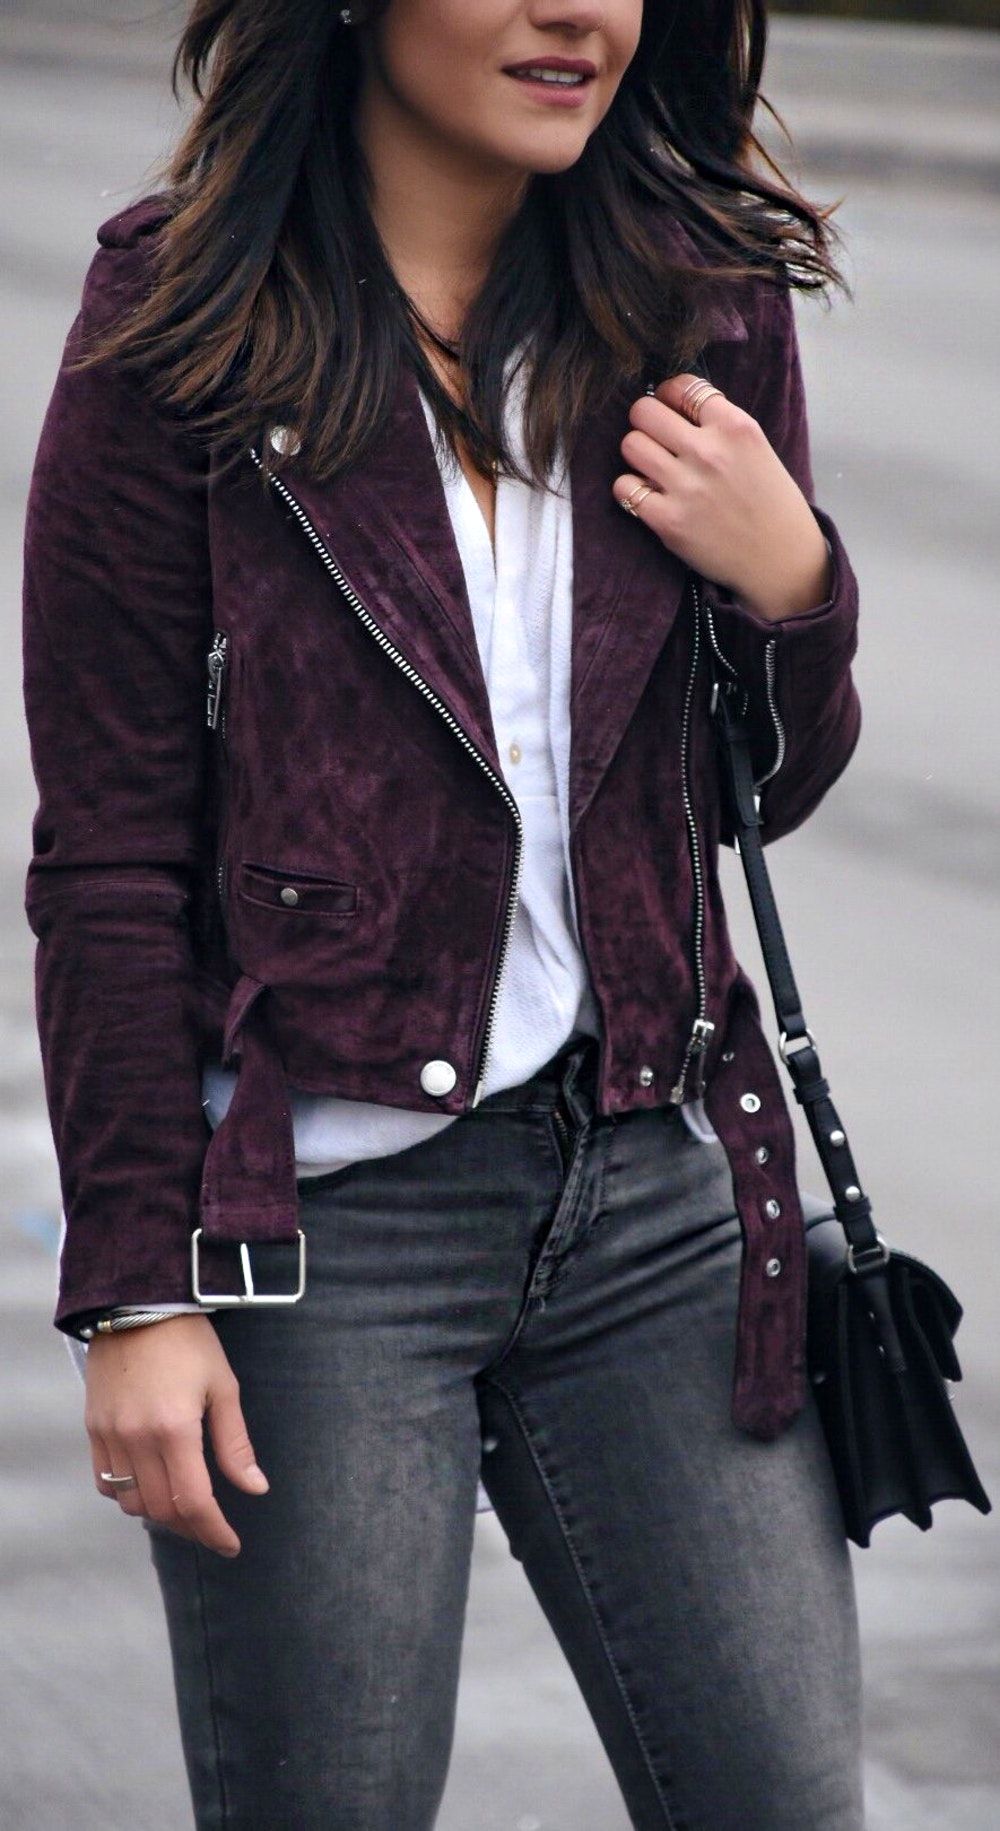 Purple Leather Jacket Outfit Ideas